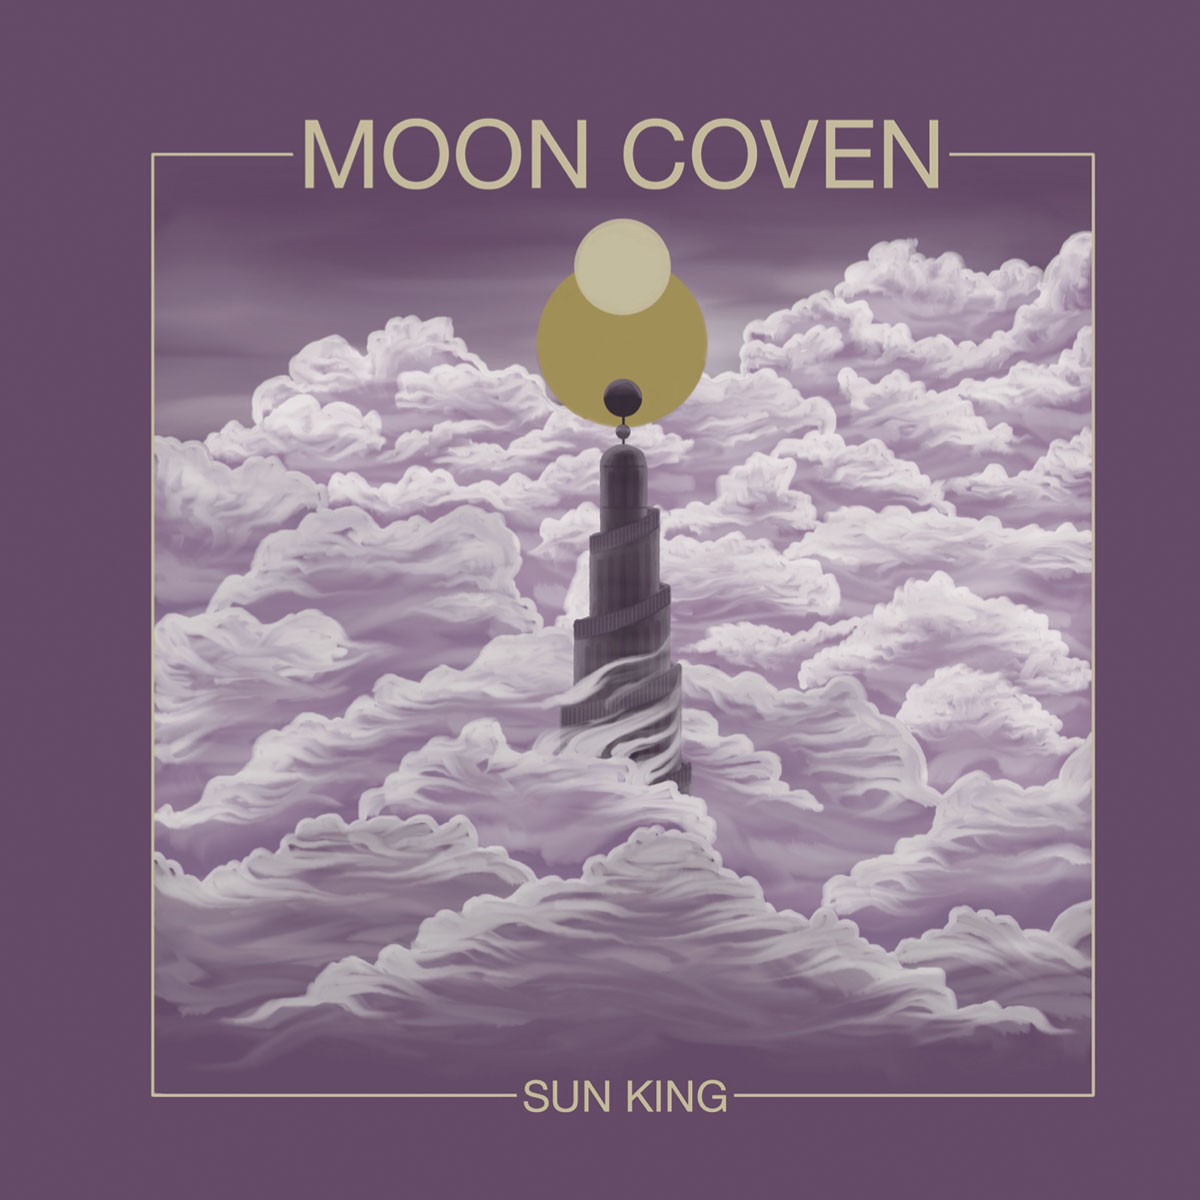 Sun King by Moon Coven